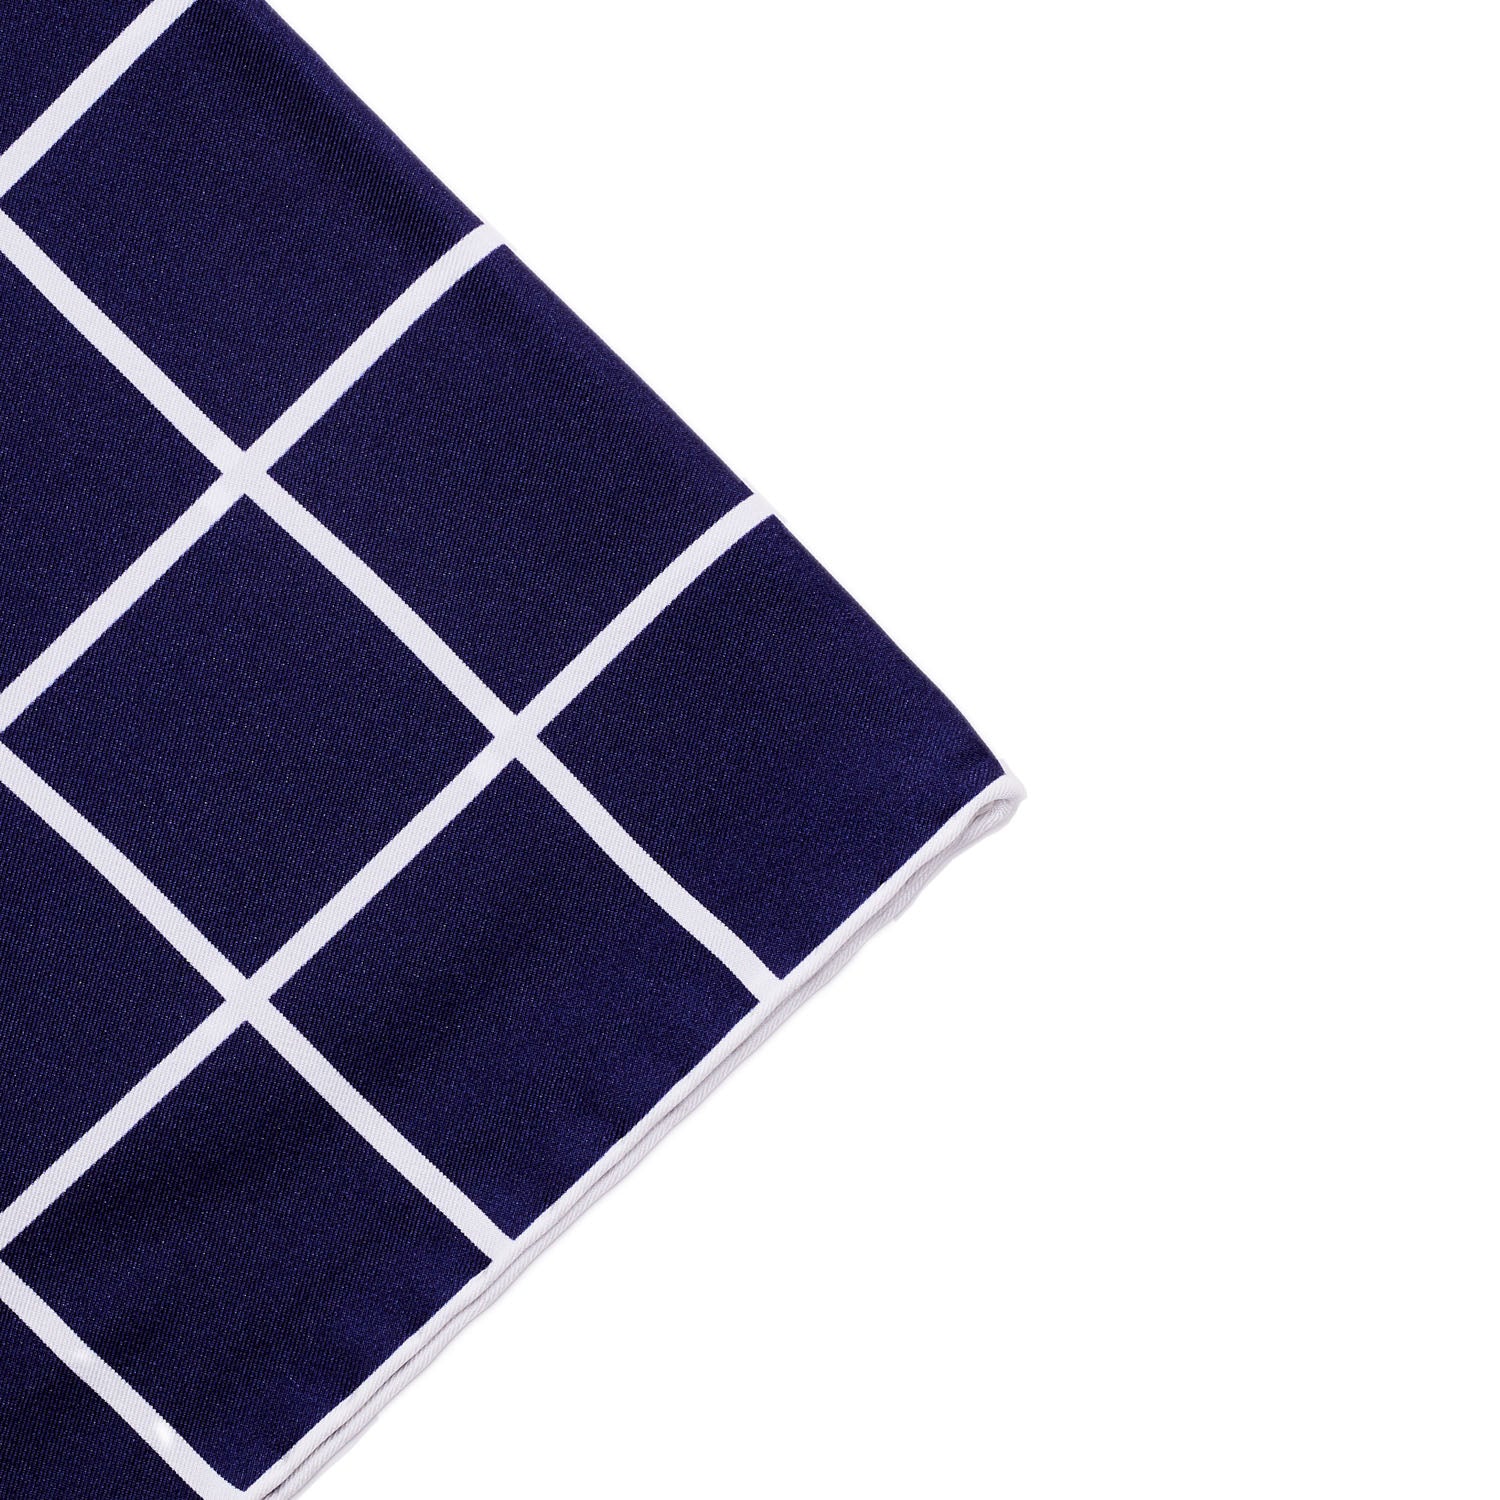 A Sovereign Grade Prince of Wales Pocket Square in Navy/White, from KirbyAllison.com, with a blue and white Prince of Wales design on a white background.